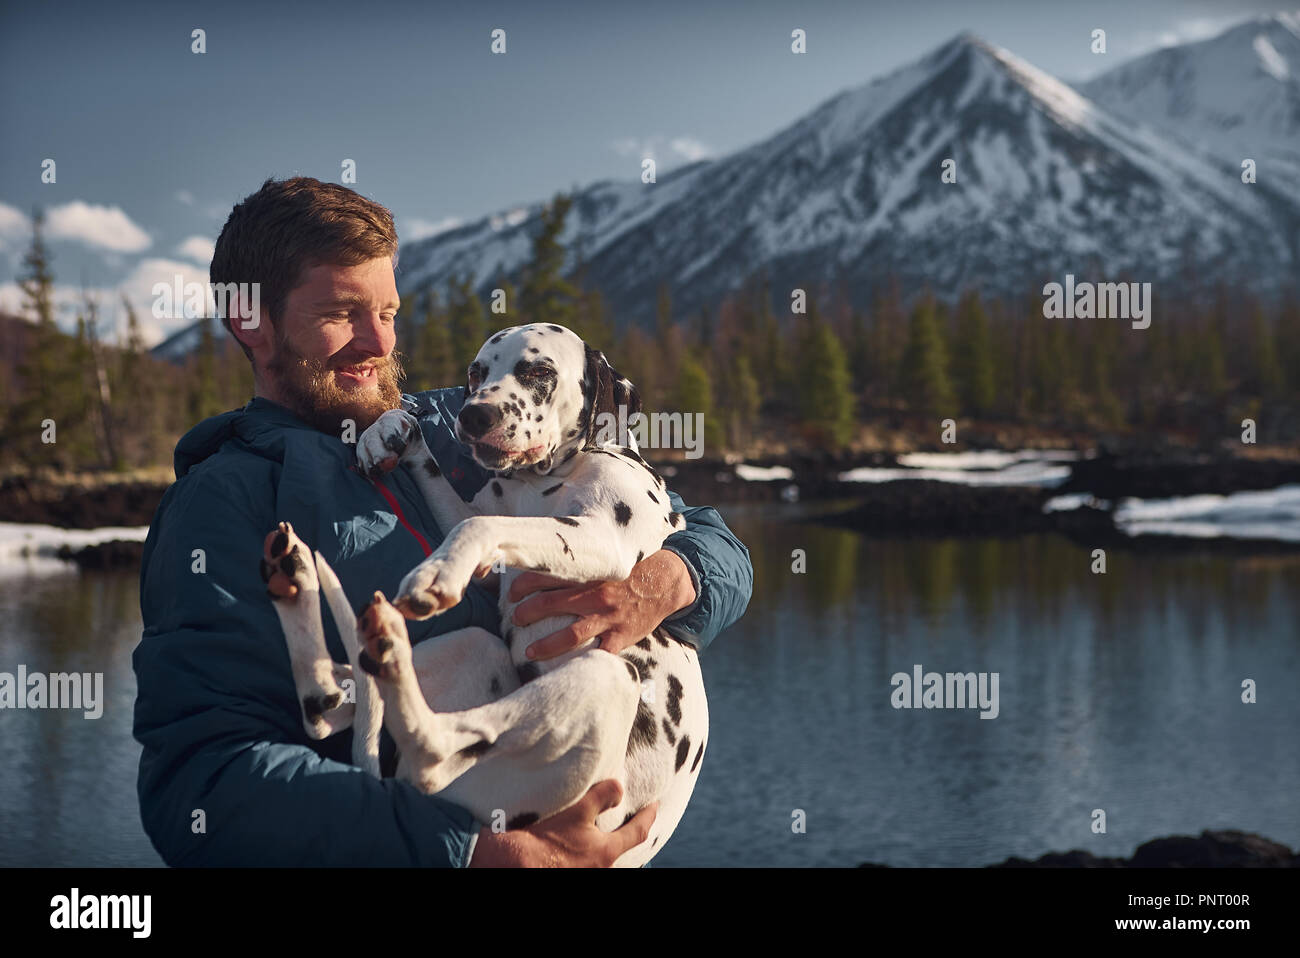 Man playing with his dog outdoors mountain terrain Stock Photo